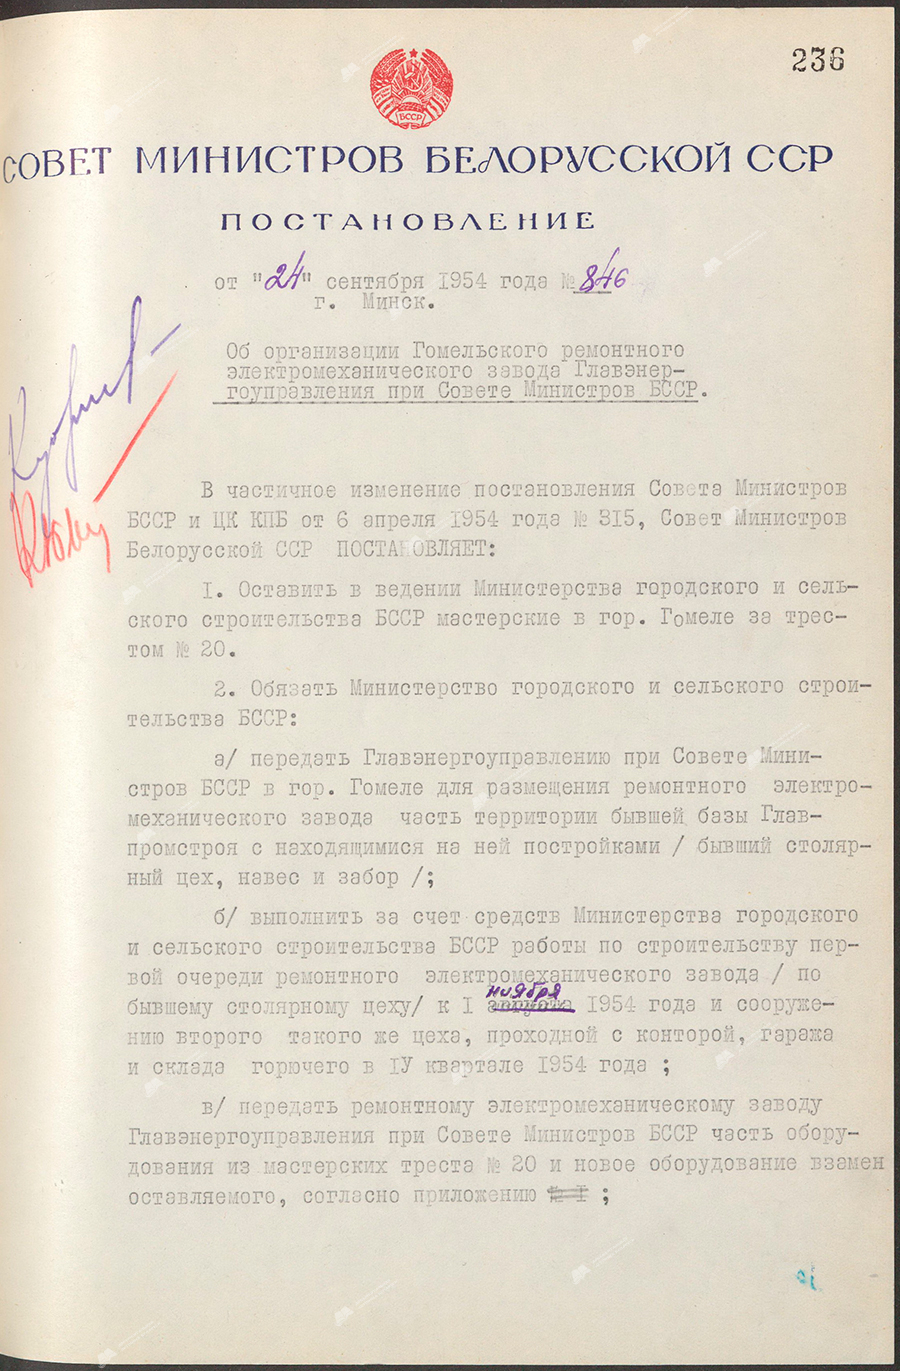 Resolution No. 846 of the Council of Ministers of the Byelorussian SSR «On the organization of the Gomel Electromechanical Repair Plant of the Main Energy Administration under the Council of Ministers of the BSSR»-с. 0